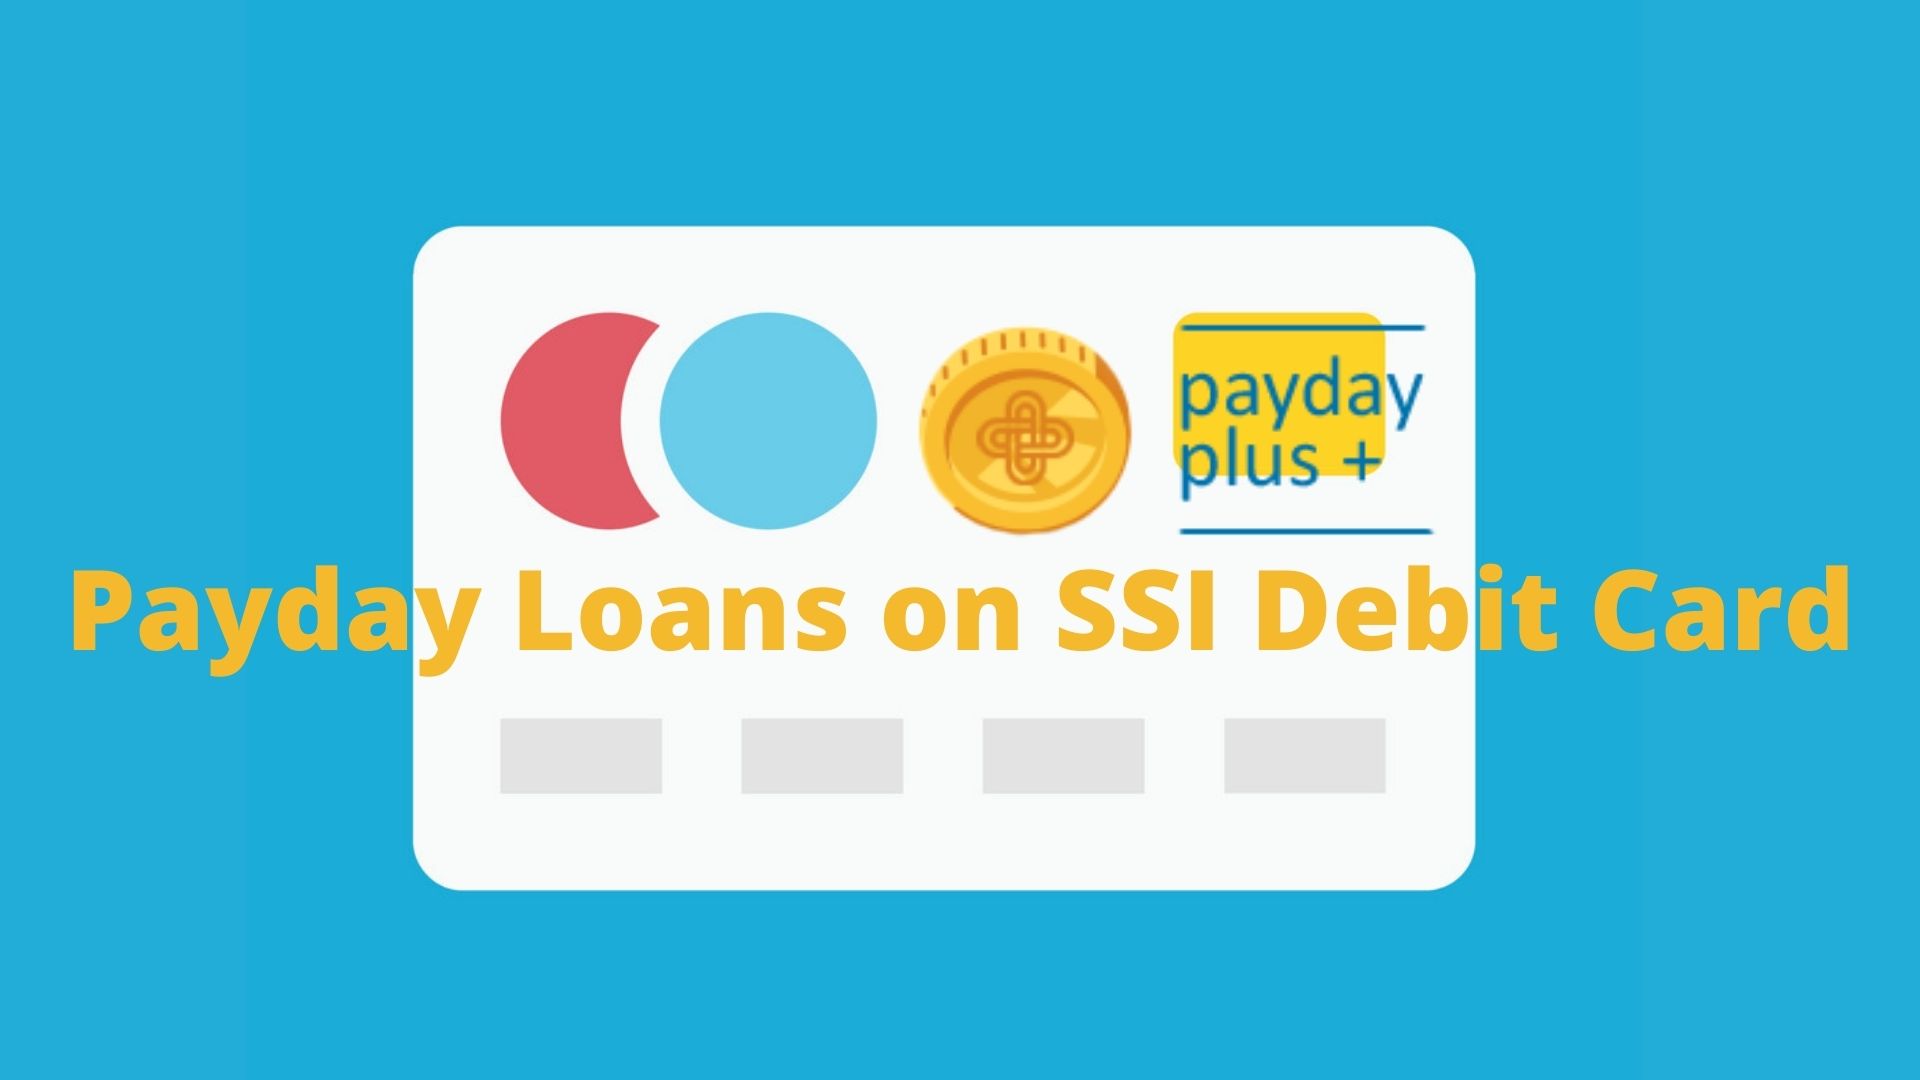 Payday loans with SSI debit card